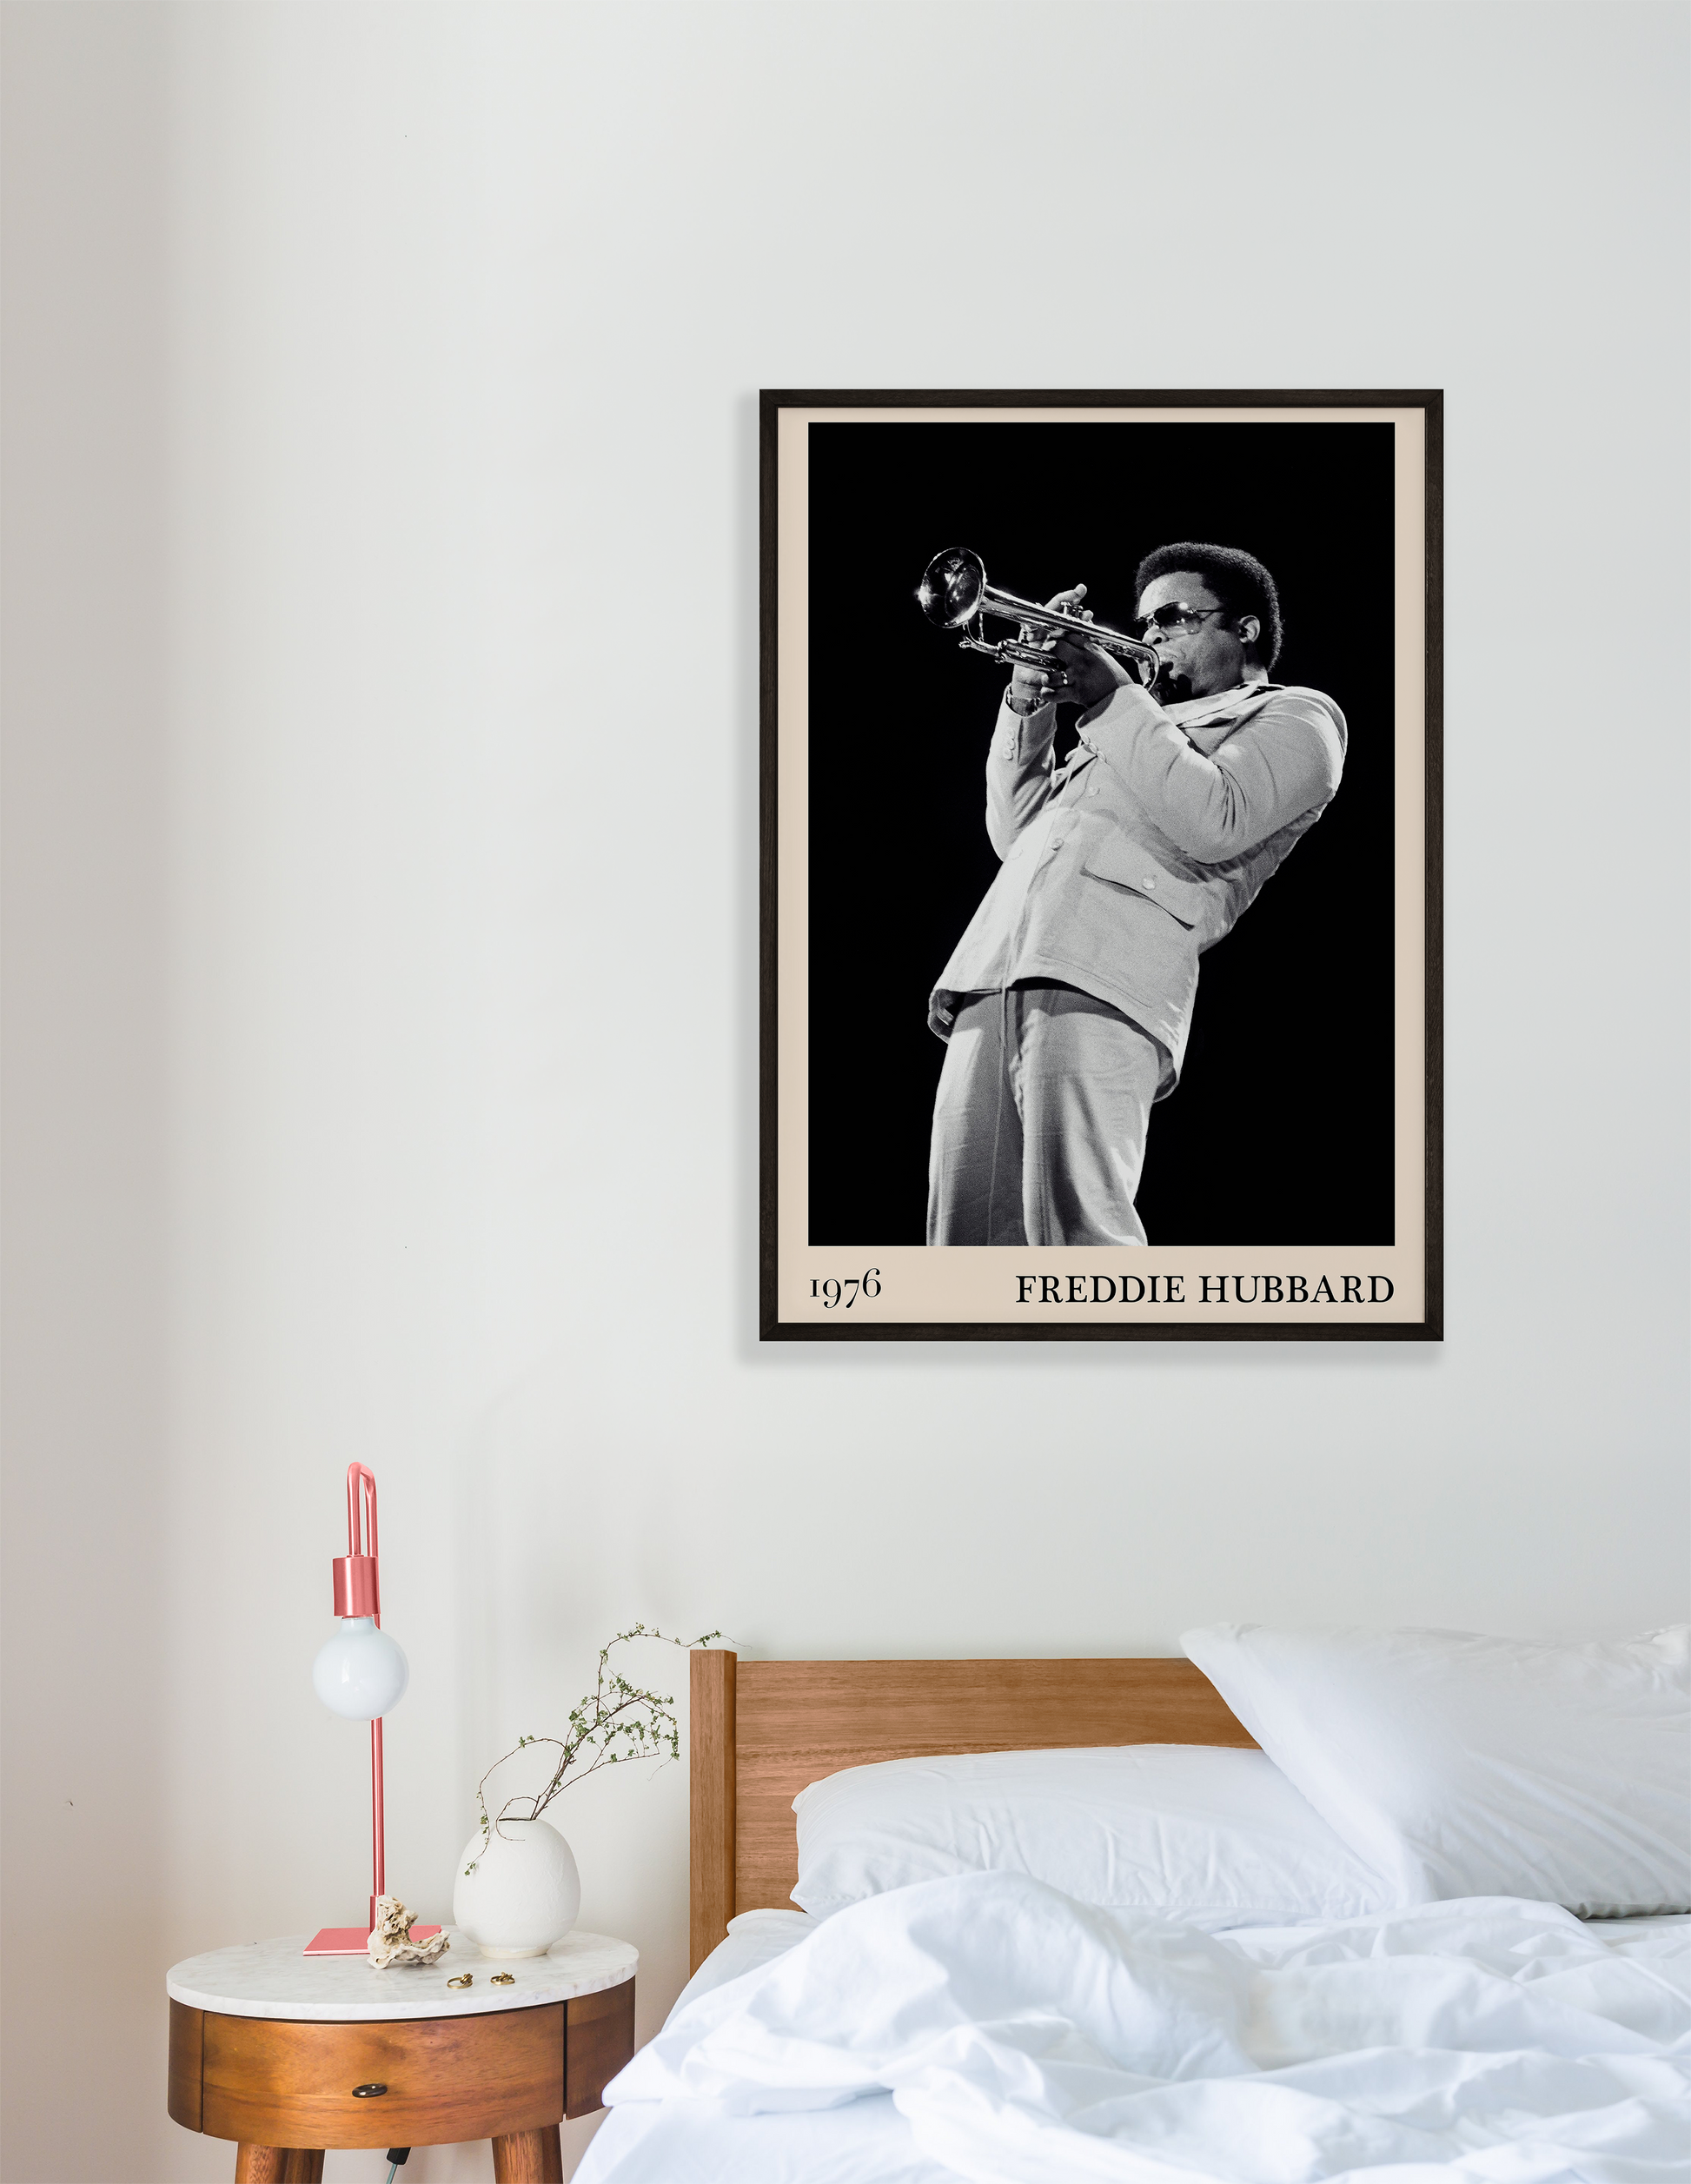 1976 photograph of Freddie Hubbard taken by Thomas Marcello. Picture crafted into a cool black framed jazz print, with an off-white border. Poster is hanging on a white bedroom wall